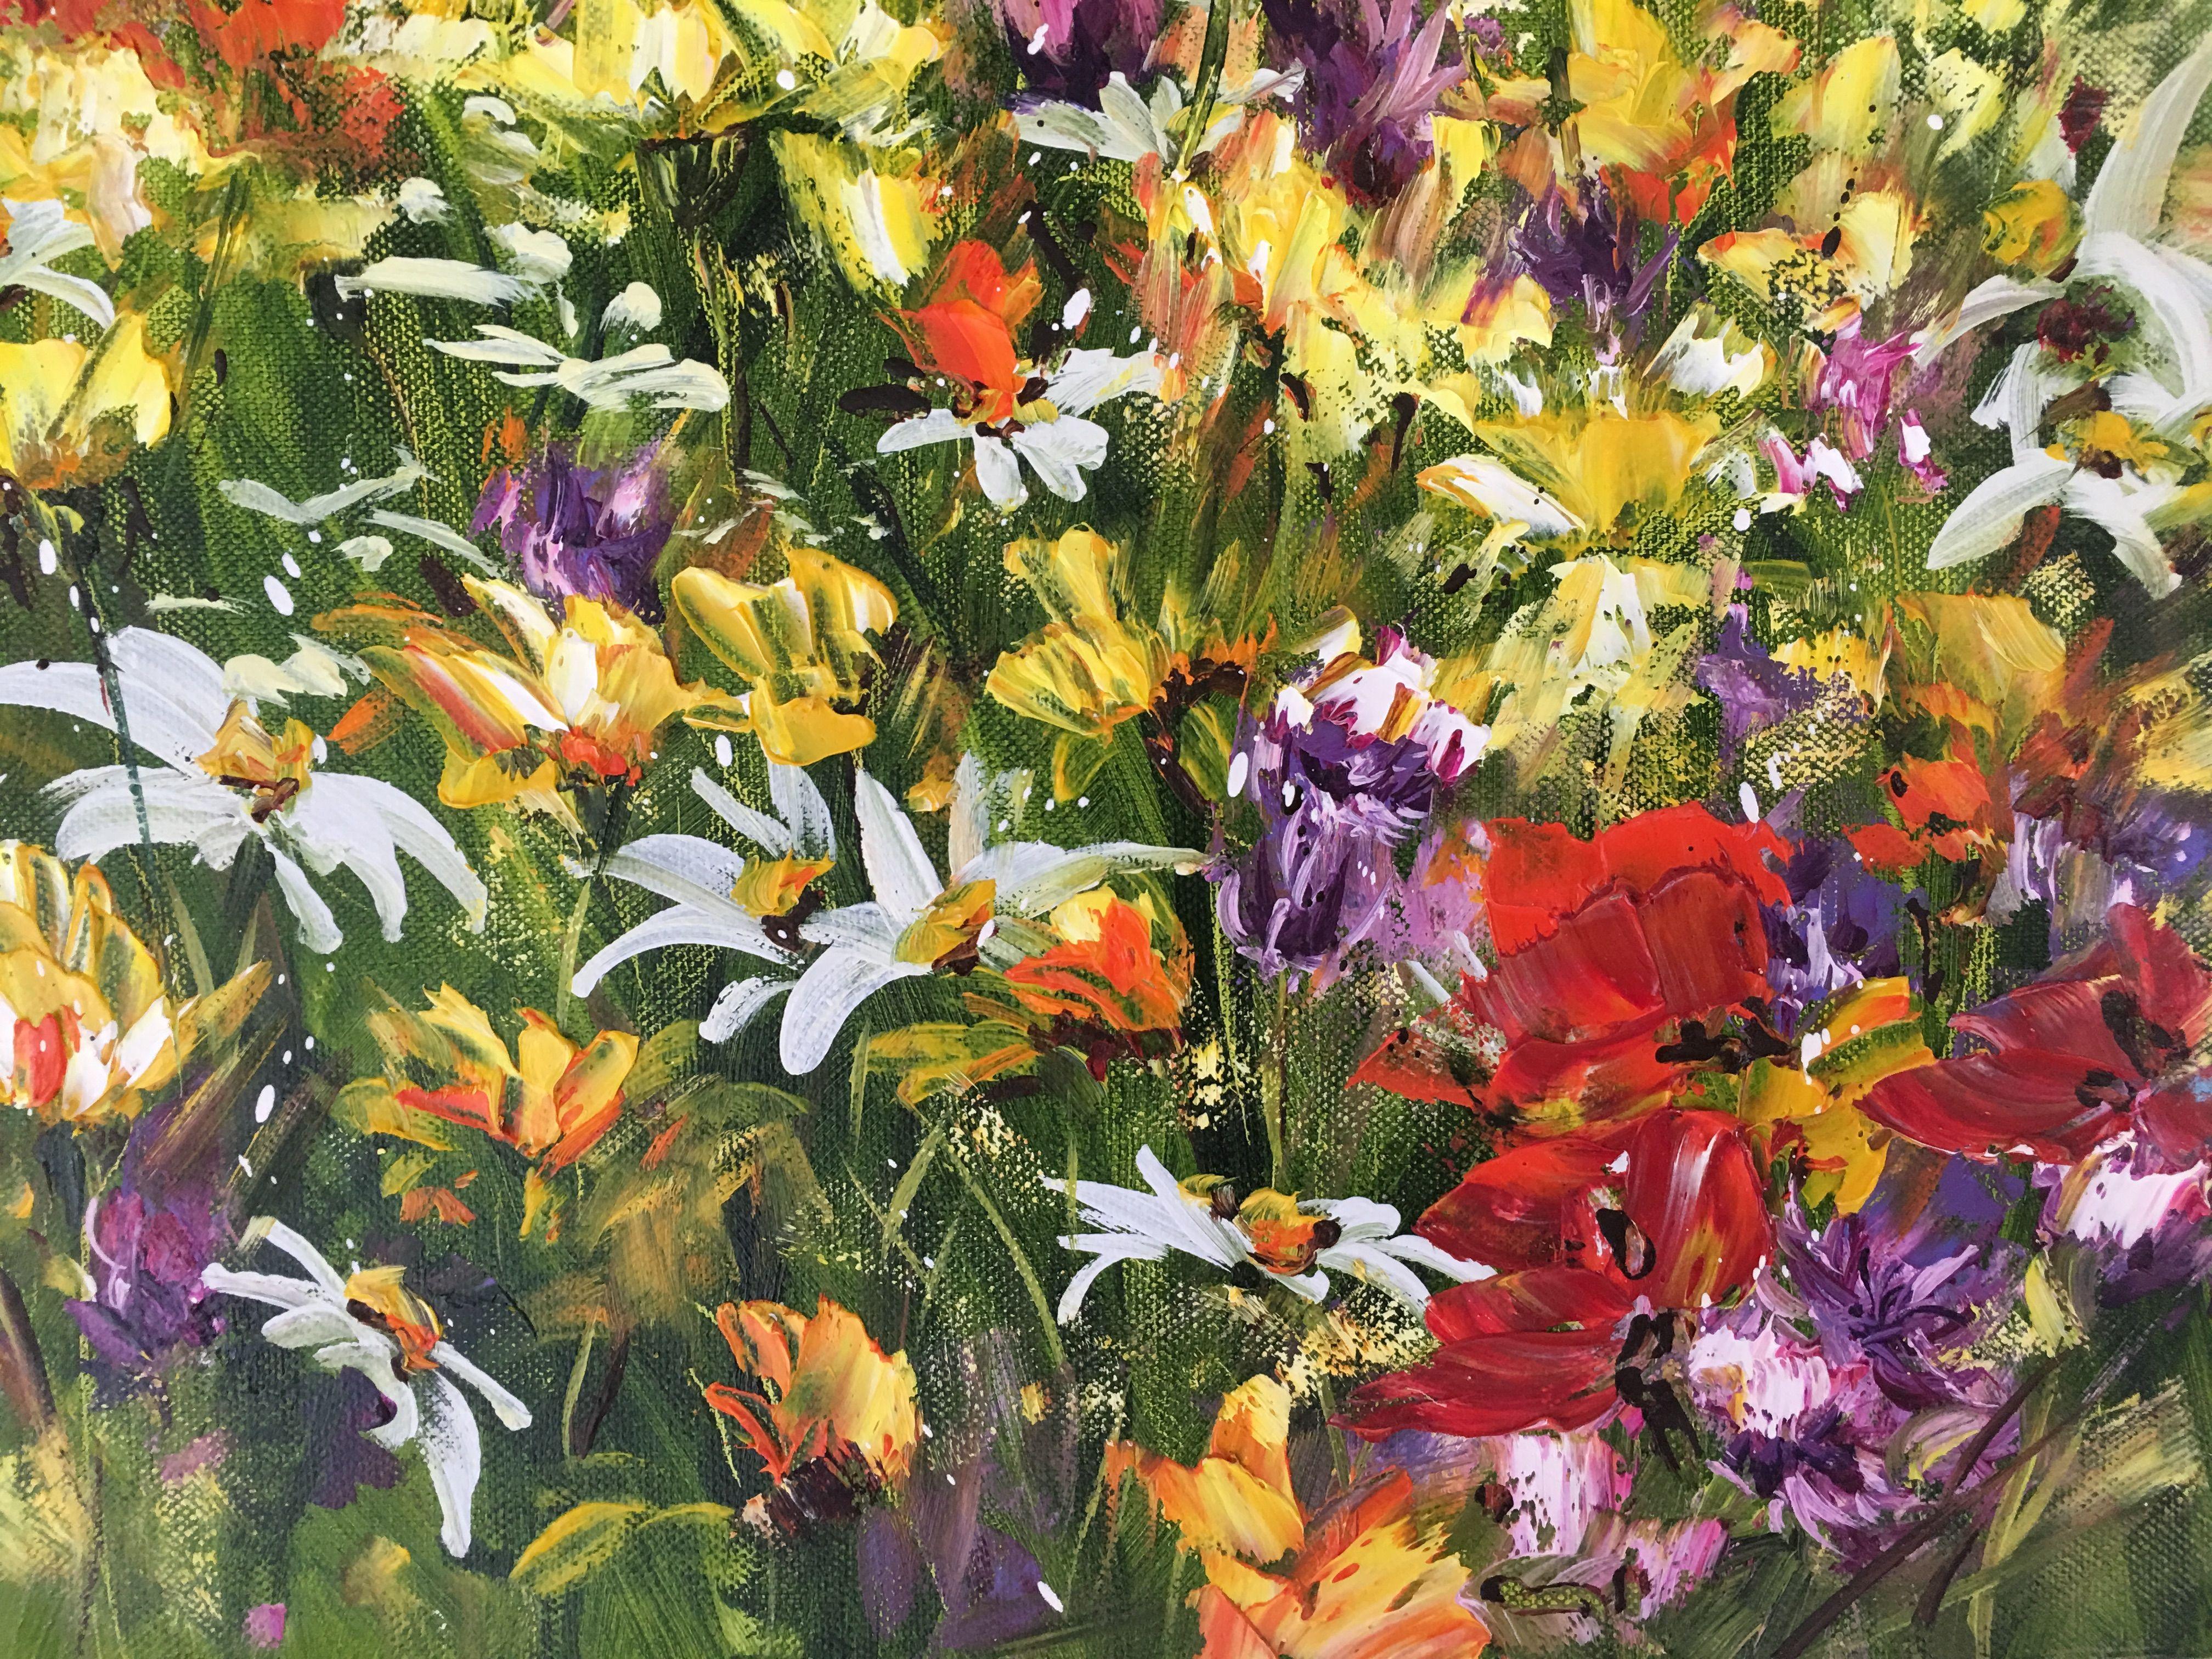 Scent of Summer Flowers, Painting, Oil on Canvas 3